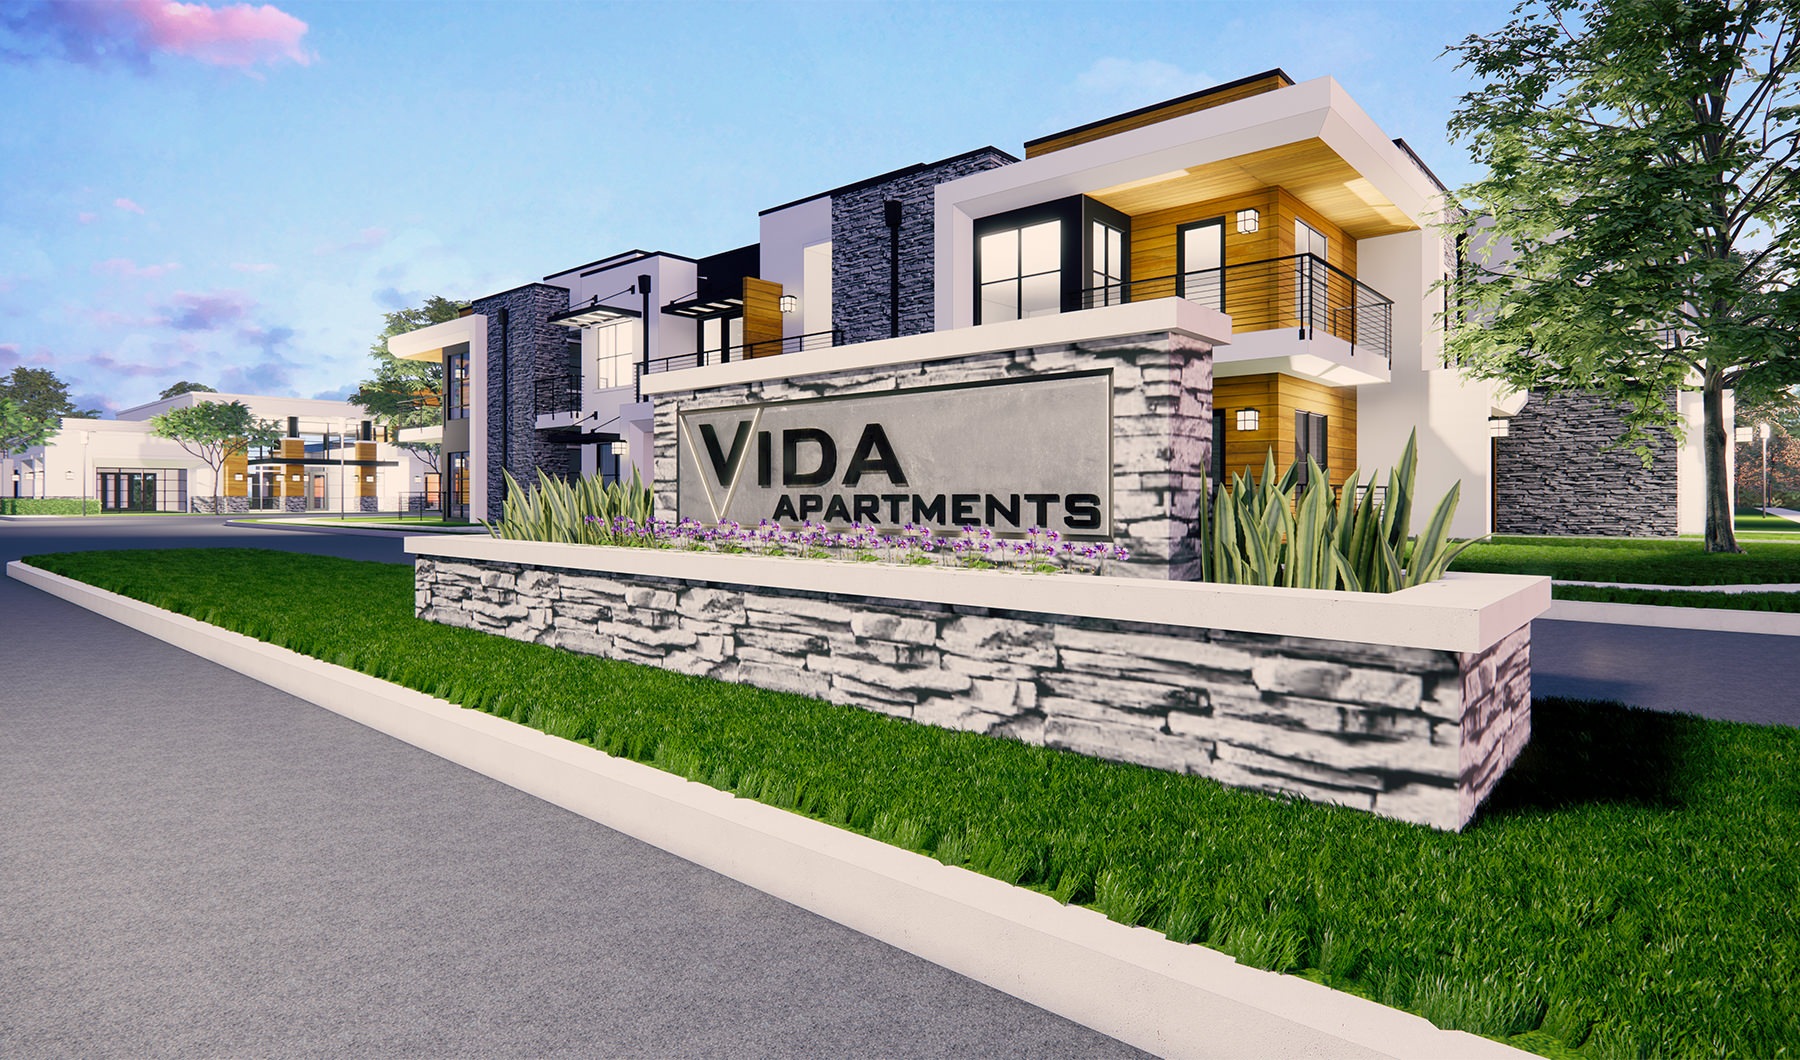 rendering of front sign